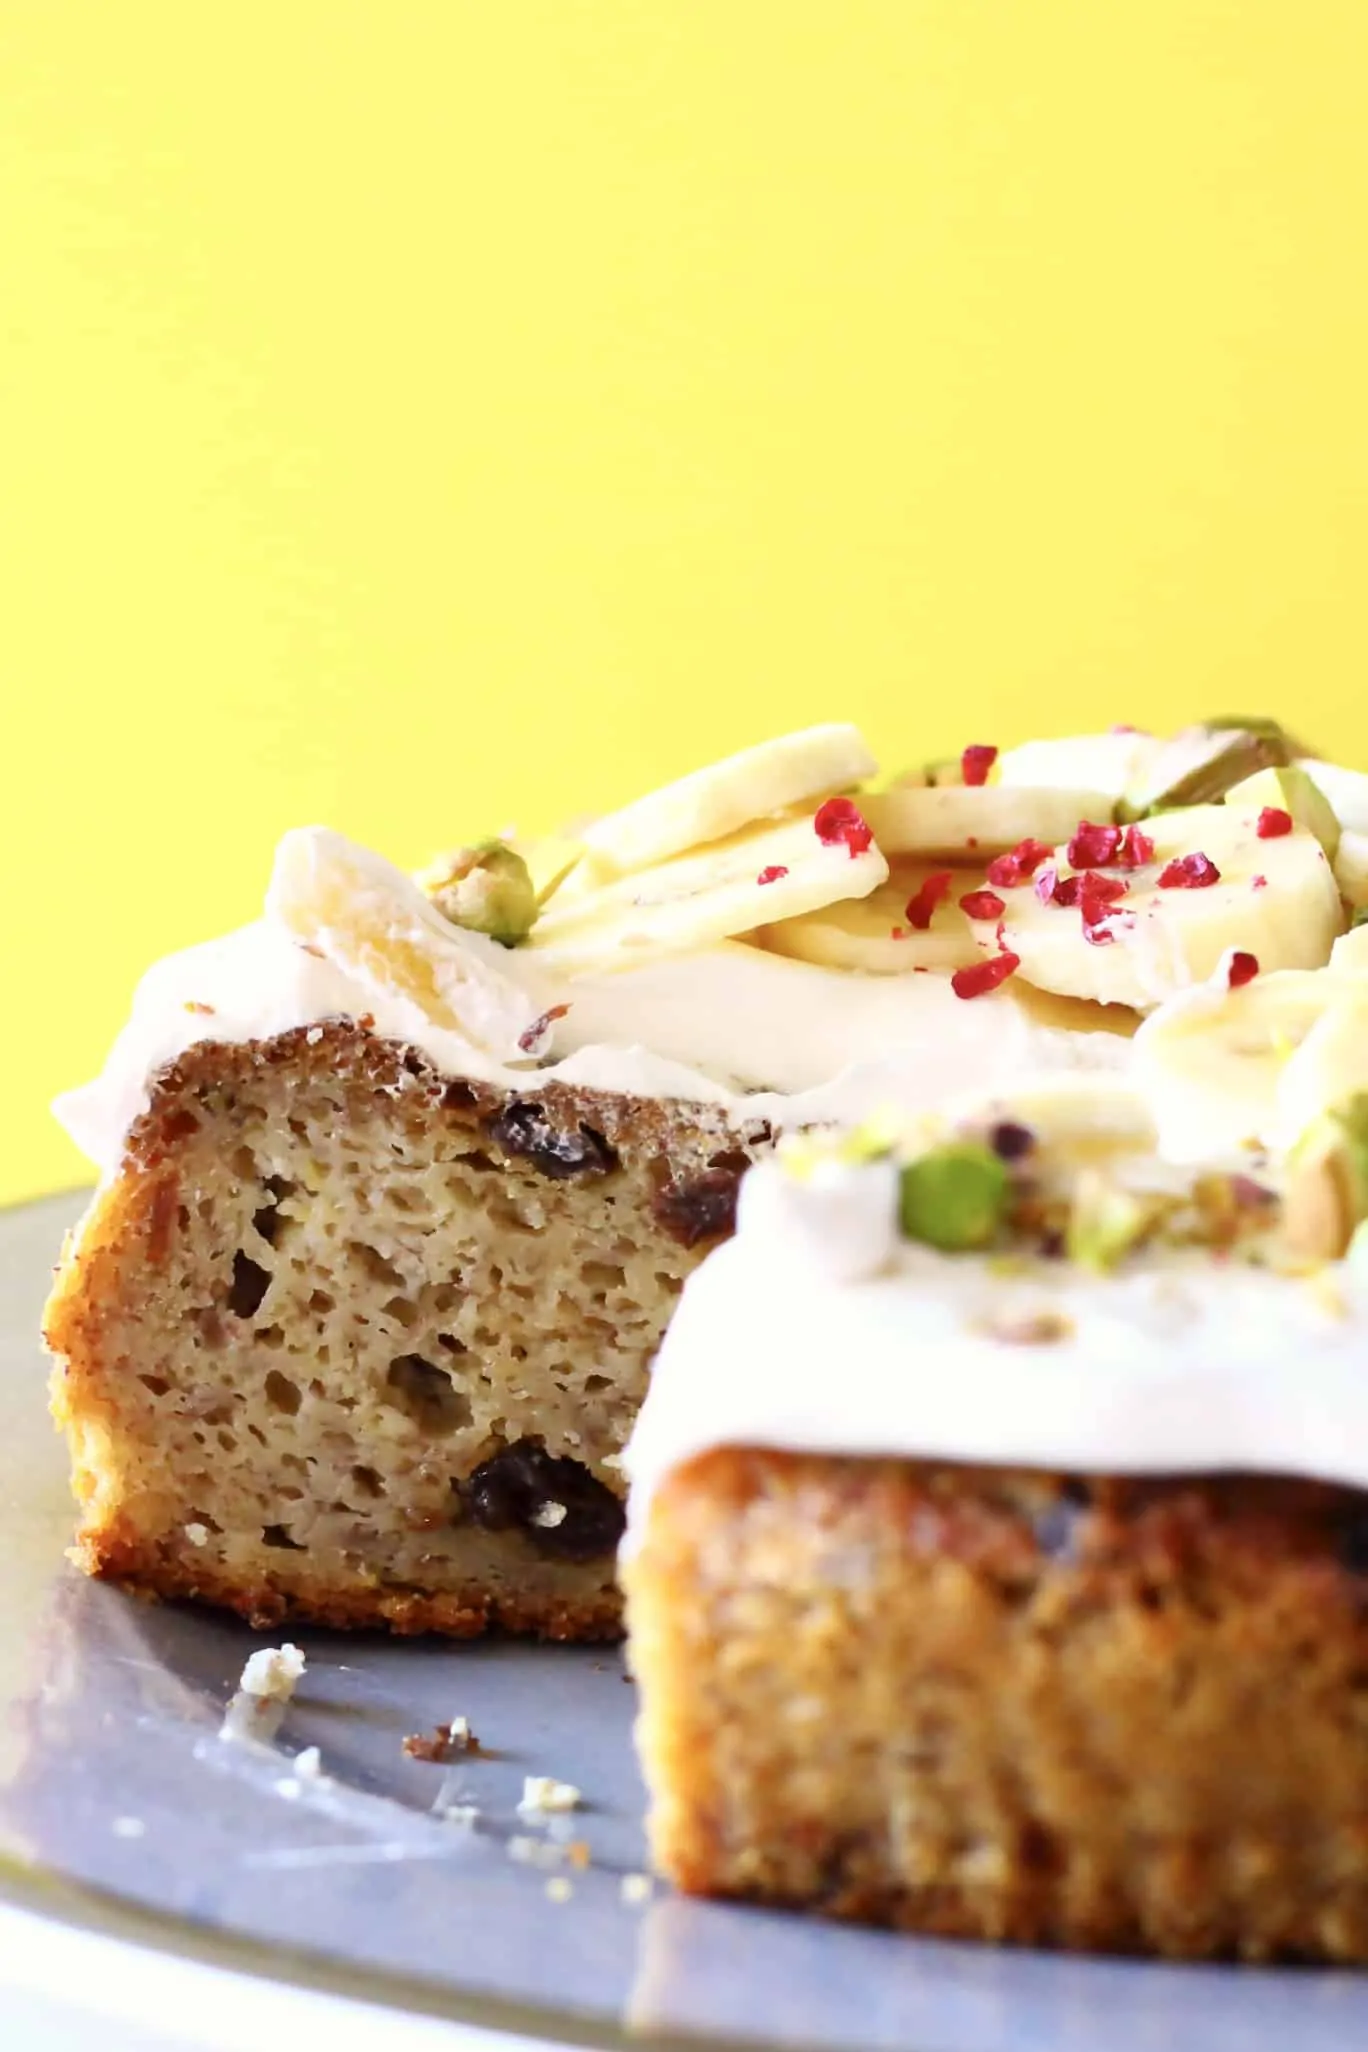 Sliced gluten-free vegan banana cake with raisins topped with vegan cream cheese frosting and sliced bananas